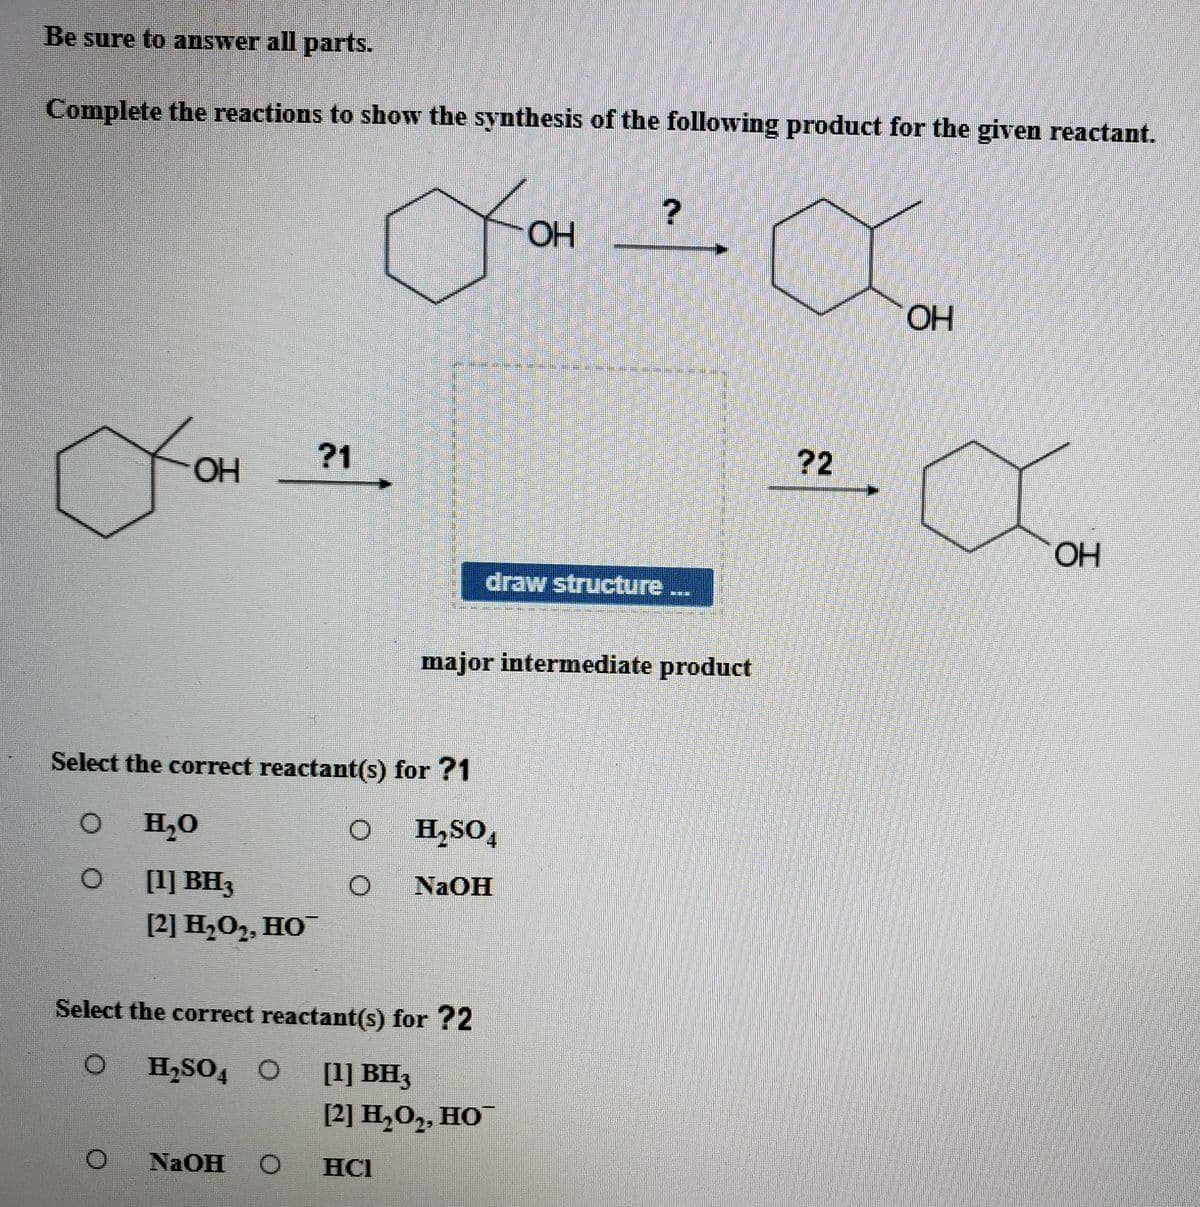 Be sure to answer all parts.
Complete the reactions to show the synthesis of the following product for the given reactant.
OH
OH
?1
?2
OH
HO
draw structure
major intermediate product
Select the correct reactant(s) for ?1
H,0
O H,SO,
4.
[1] BH3
NaOH
[2] H,0, НО
Select the correct reactant(s) for ?2
H,SO4 O
[1] BH3
[2] Н,О,, НО
NAOH
HCI
